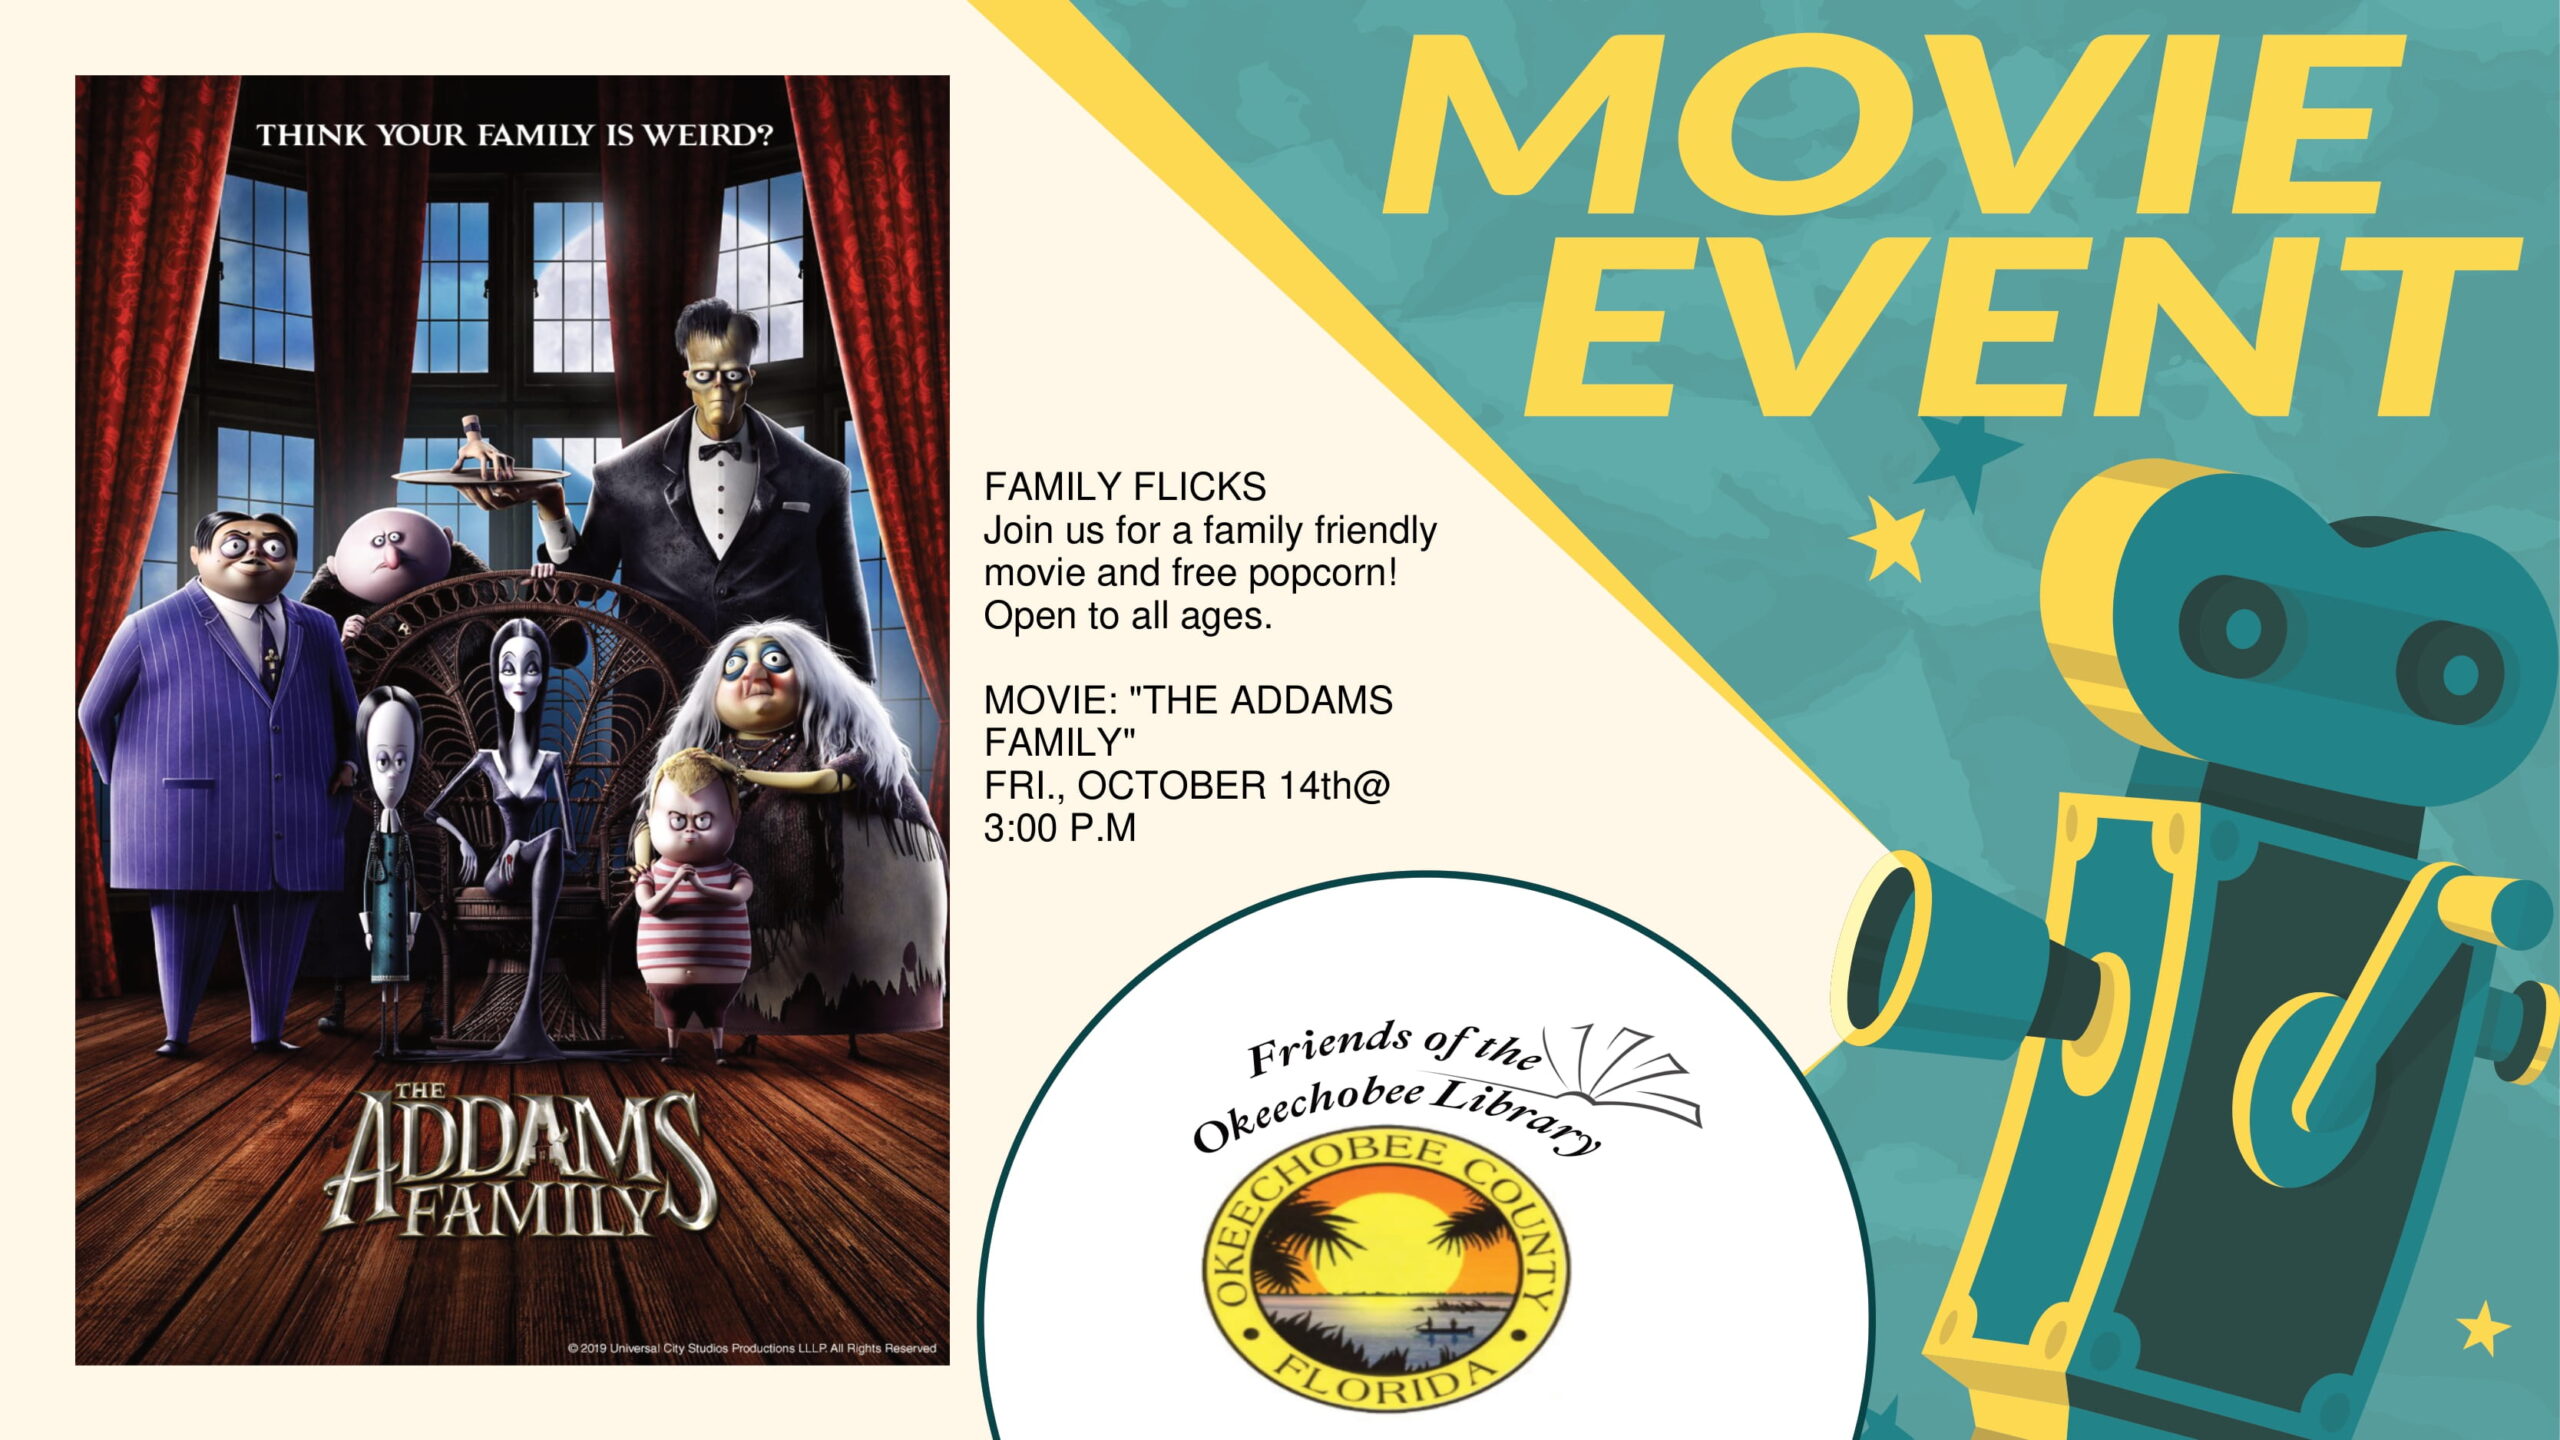 "Join us for a FREE movie and snack at the Okeechobee Library! Our Family Flicks movie event featuring The Addams Family will be held on Friday, October 14th!